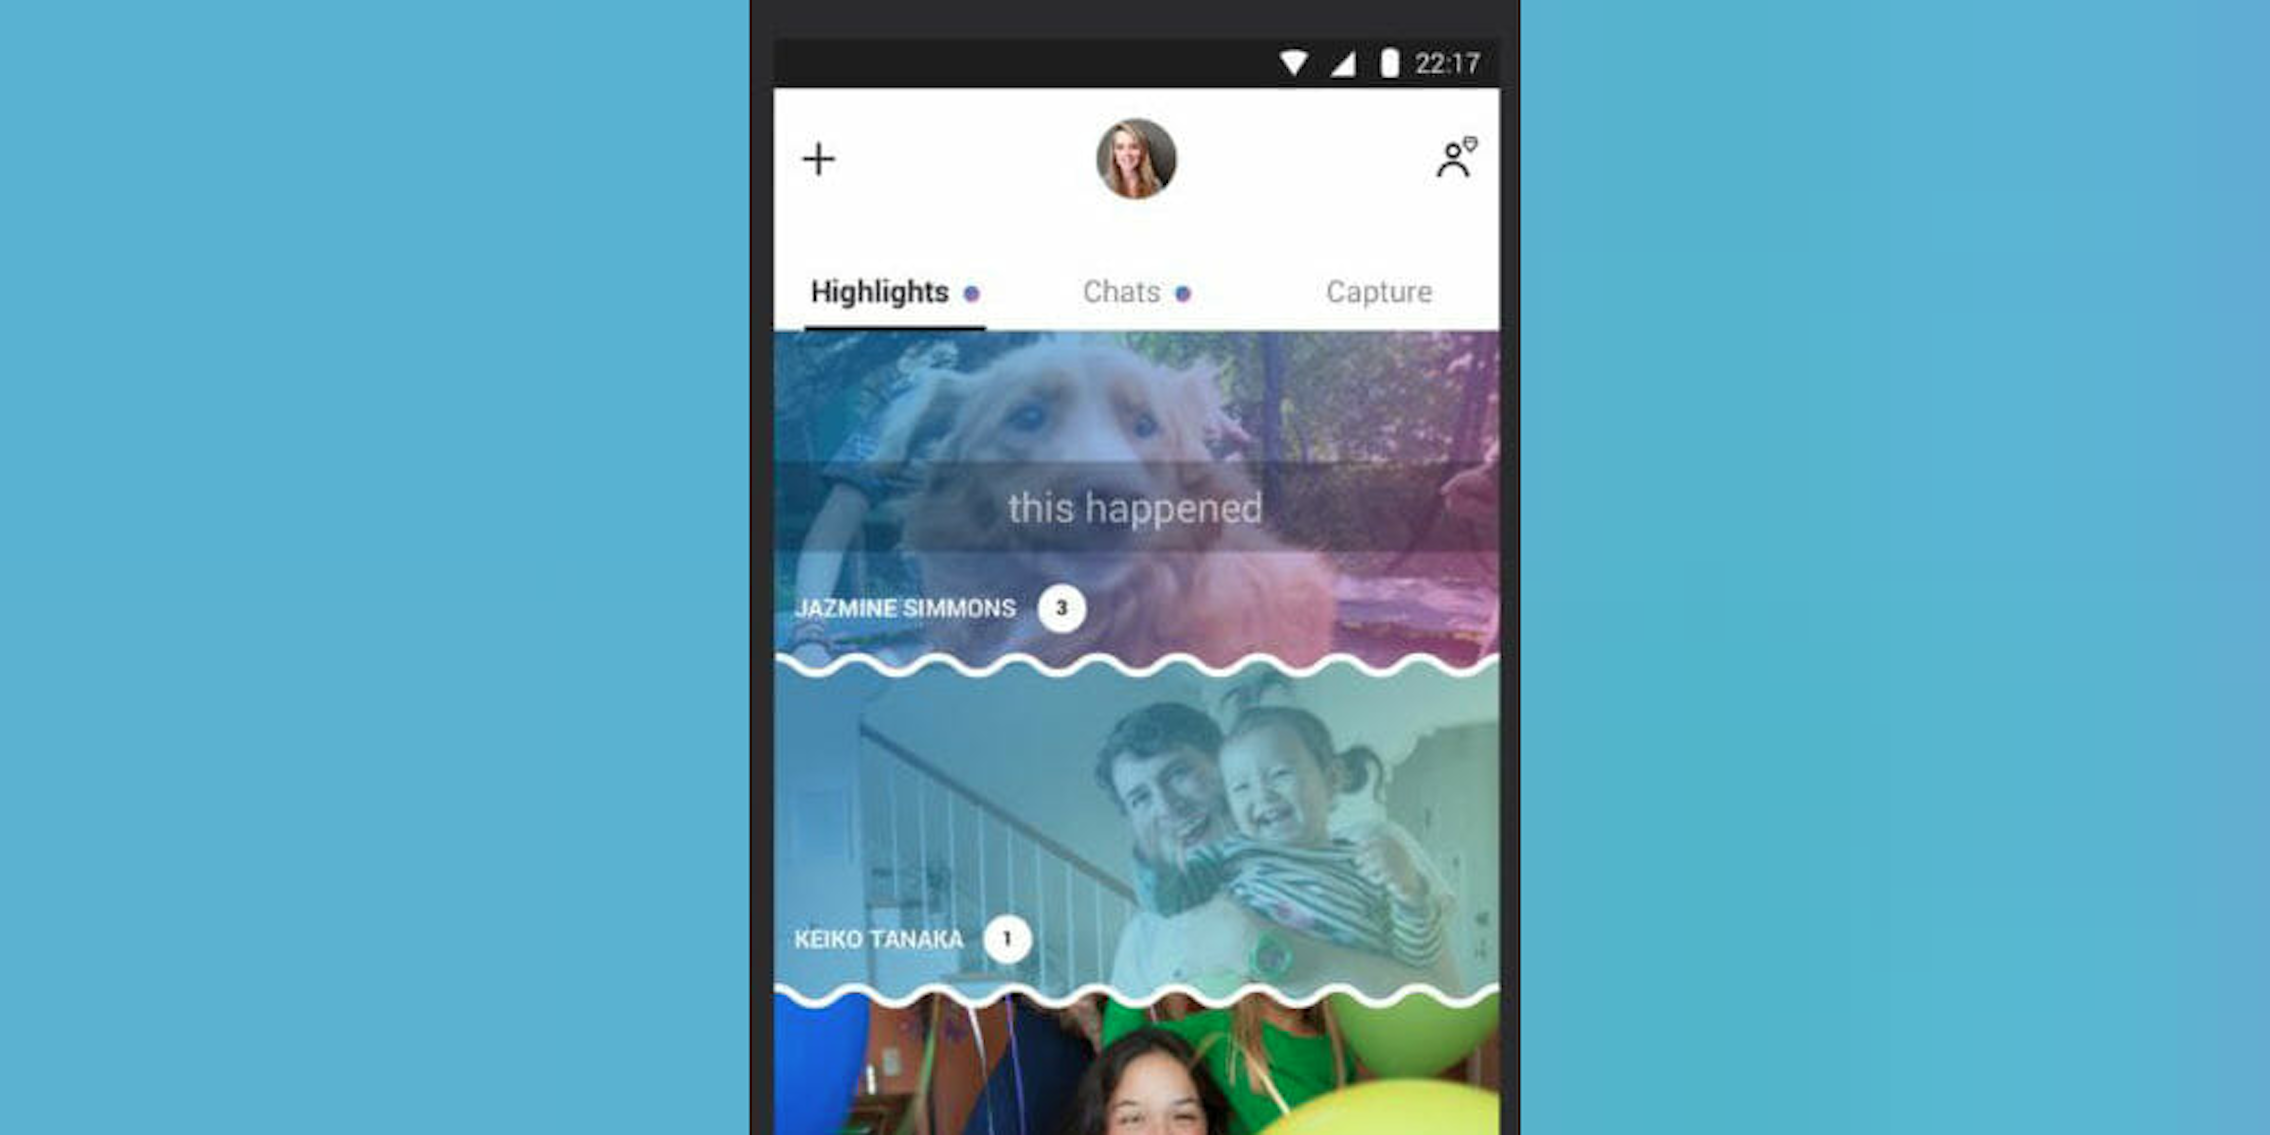 Snapchat-like features on Skype app on iOS